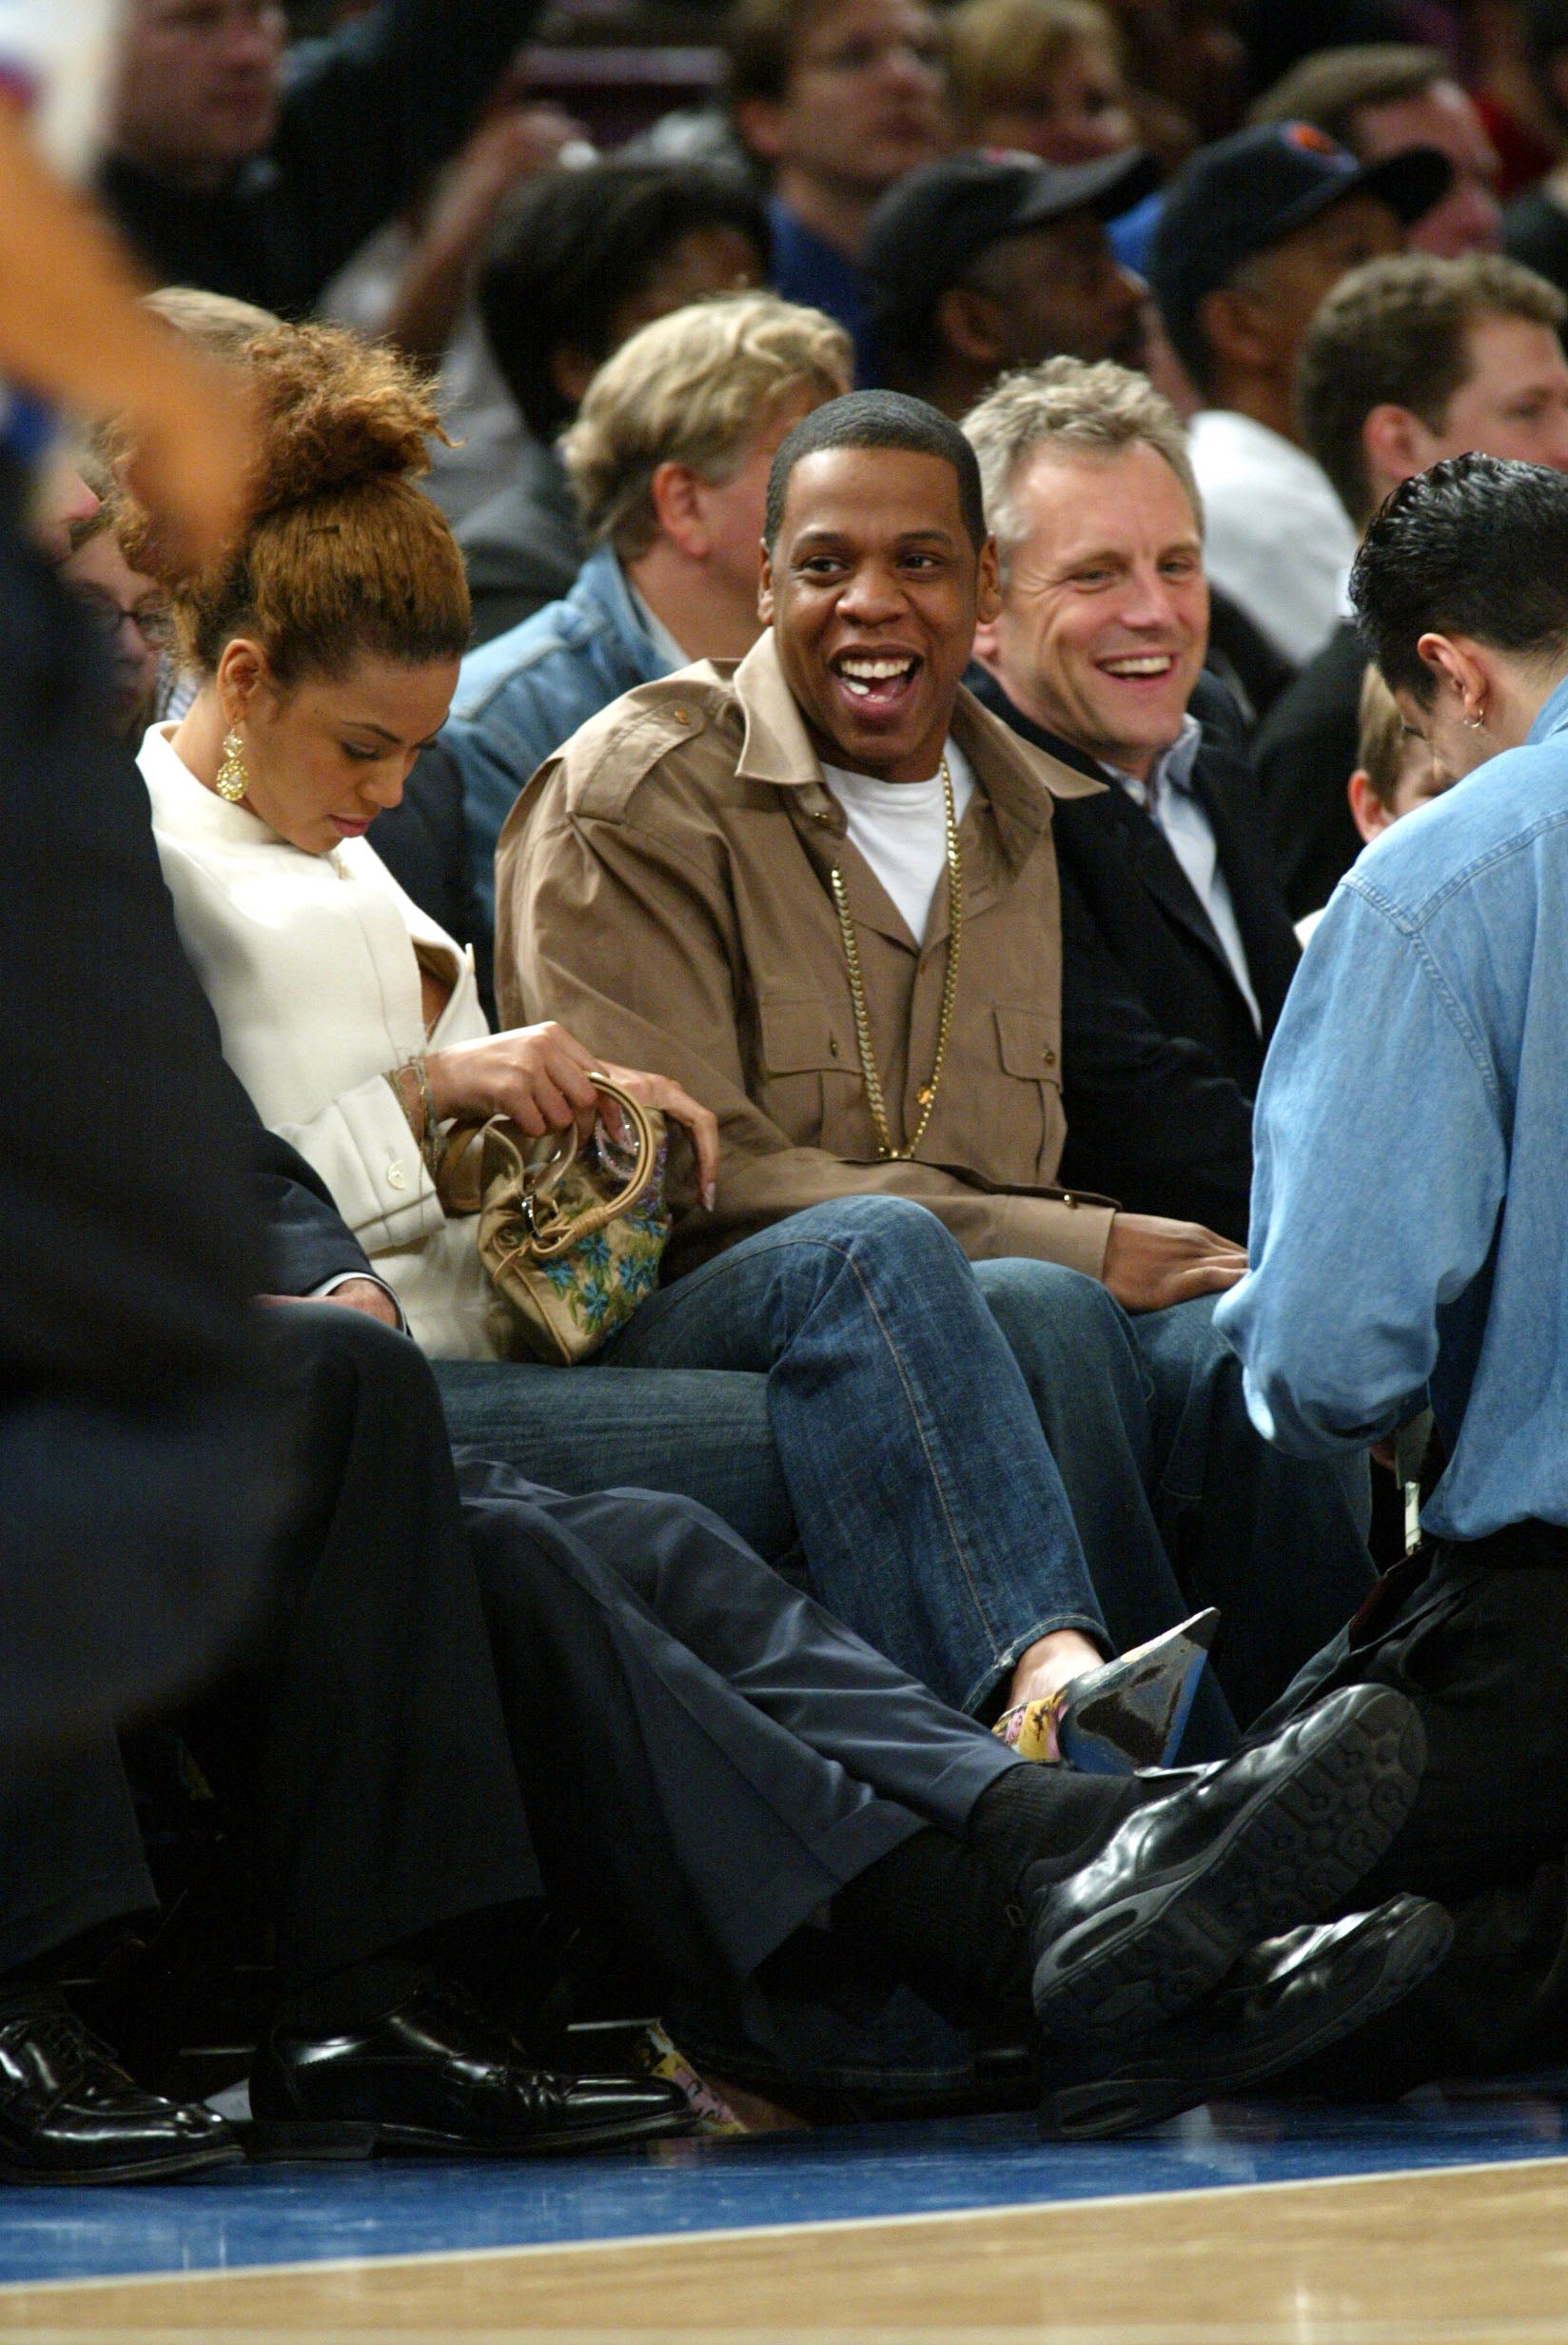 Best Photos Of Beyonce And Jay Z Courtside At Nba Games Over The Years ...